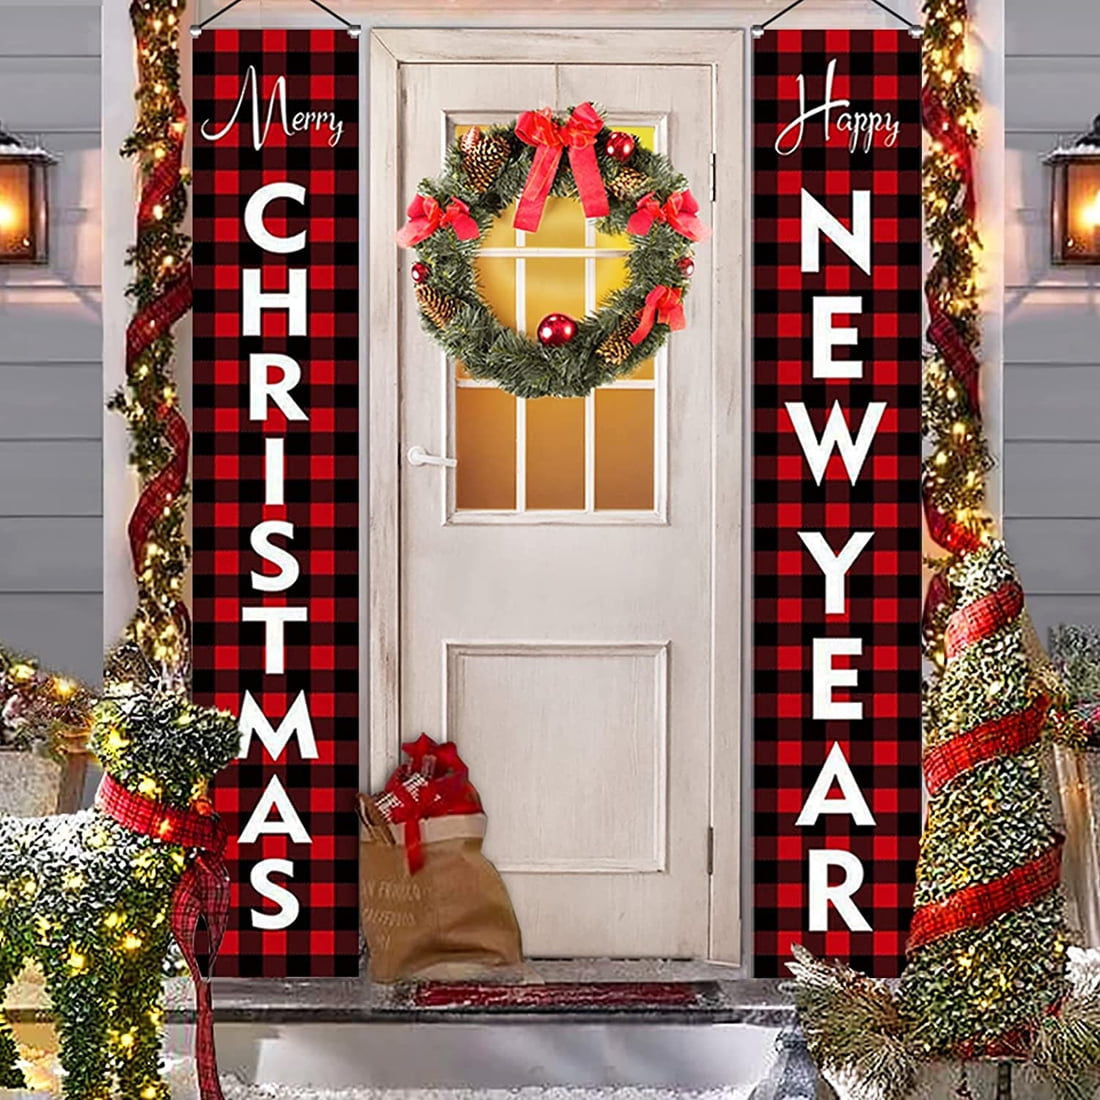 Christmas Decor Dual Sided Porch Sign Country Merry and Home Sweet Home with Buffalo Plaid Holiday Decor